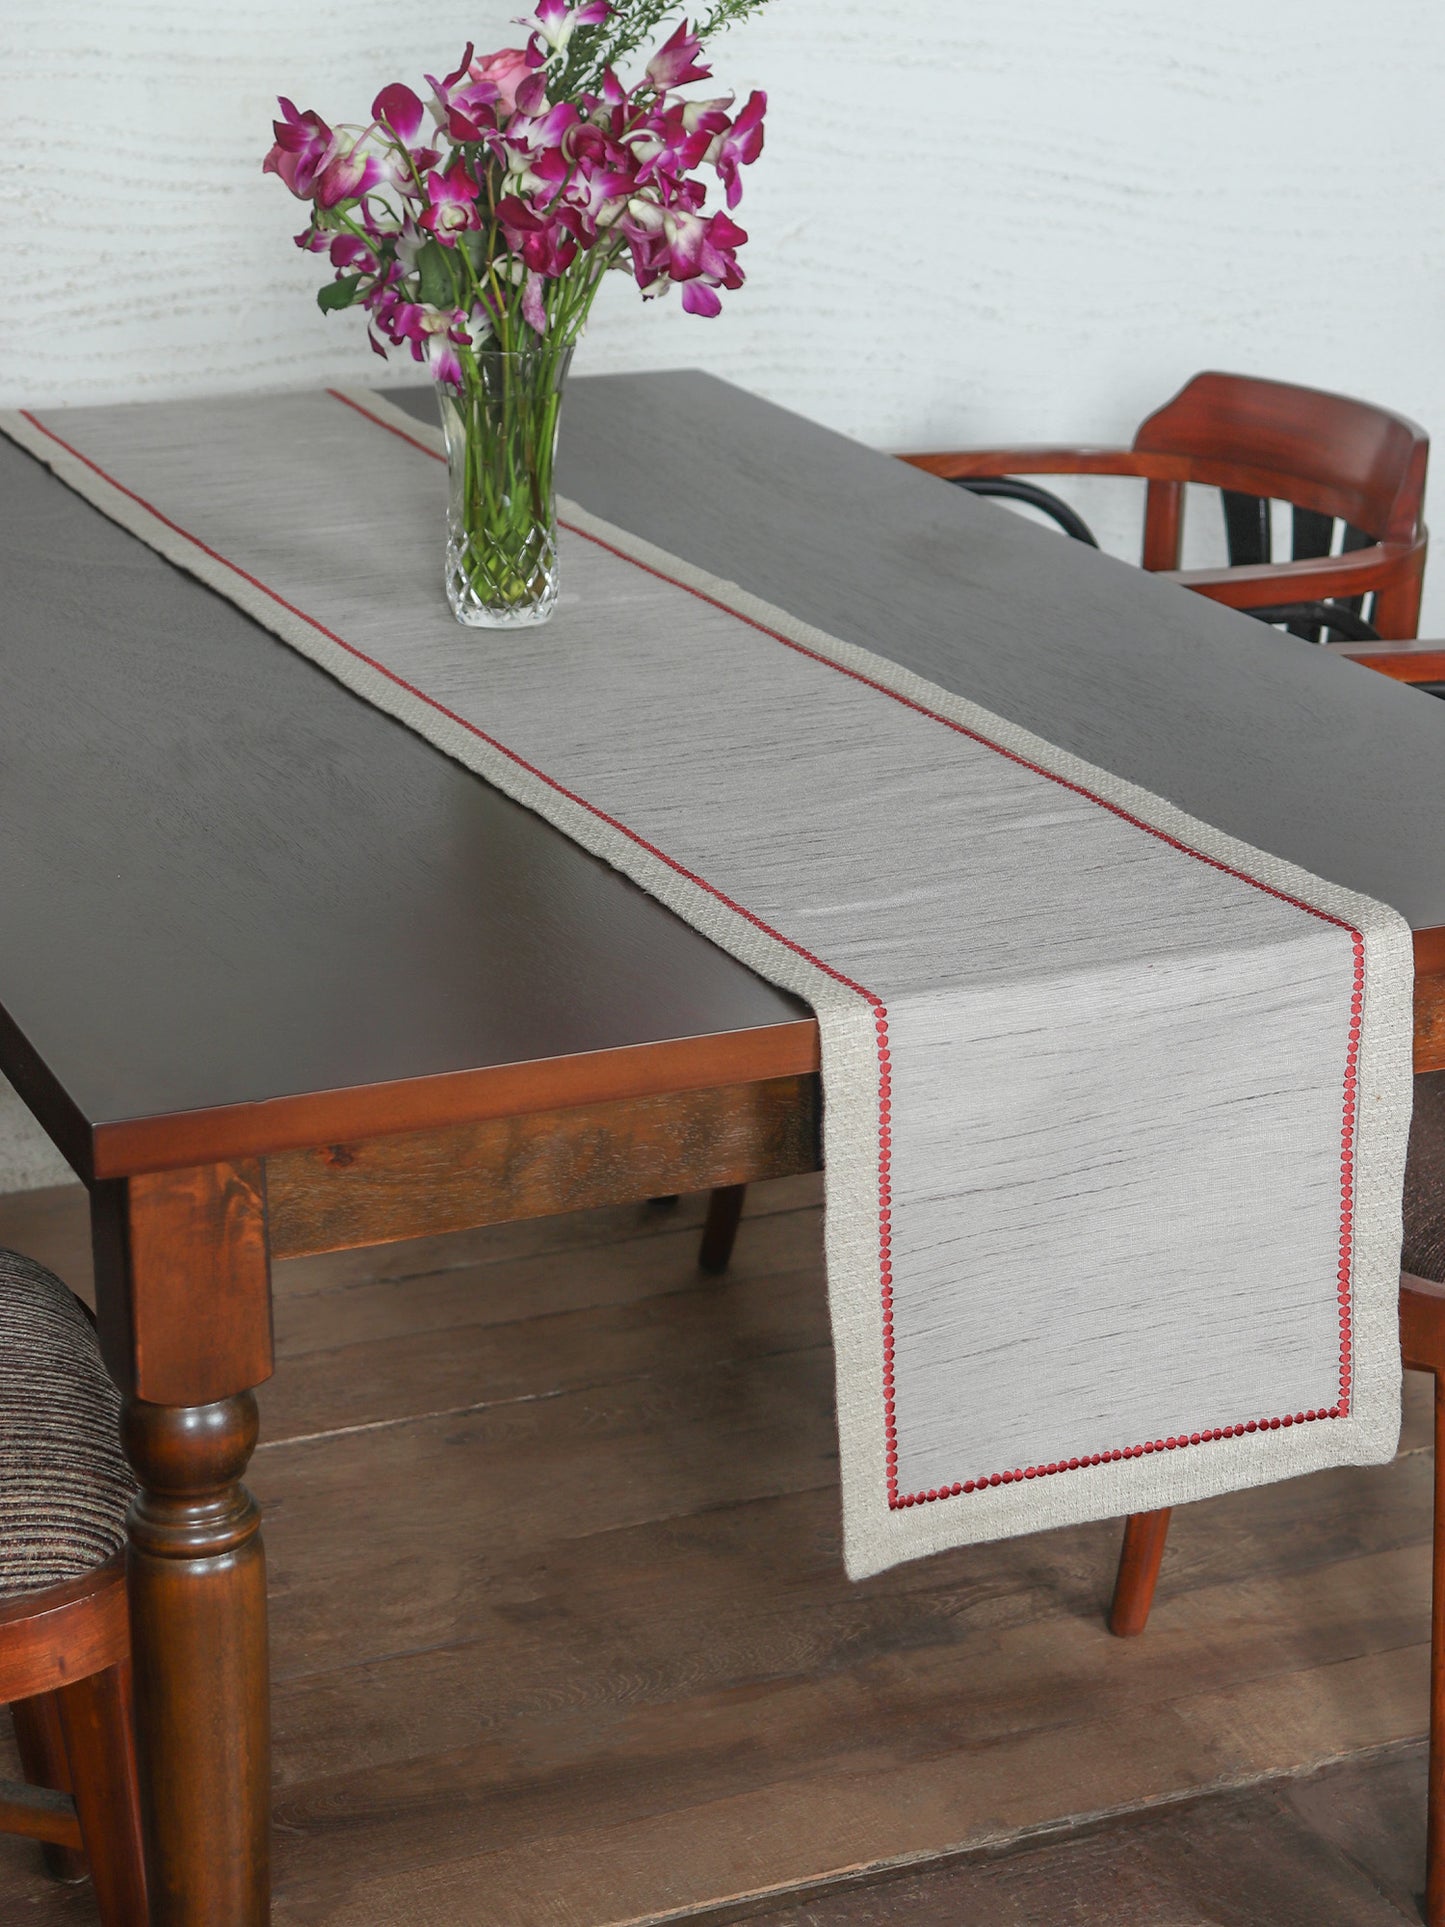 grey colored embroidered table runner for 6 seater table - 52x84 inches